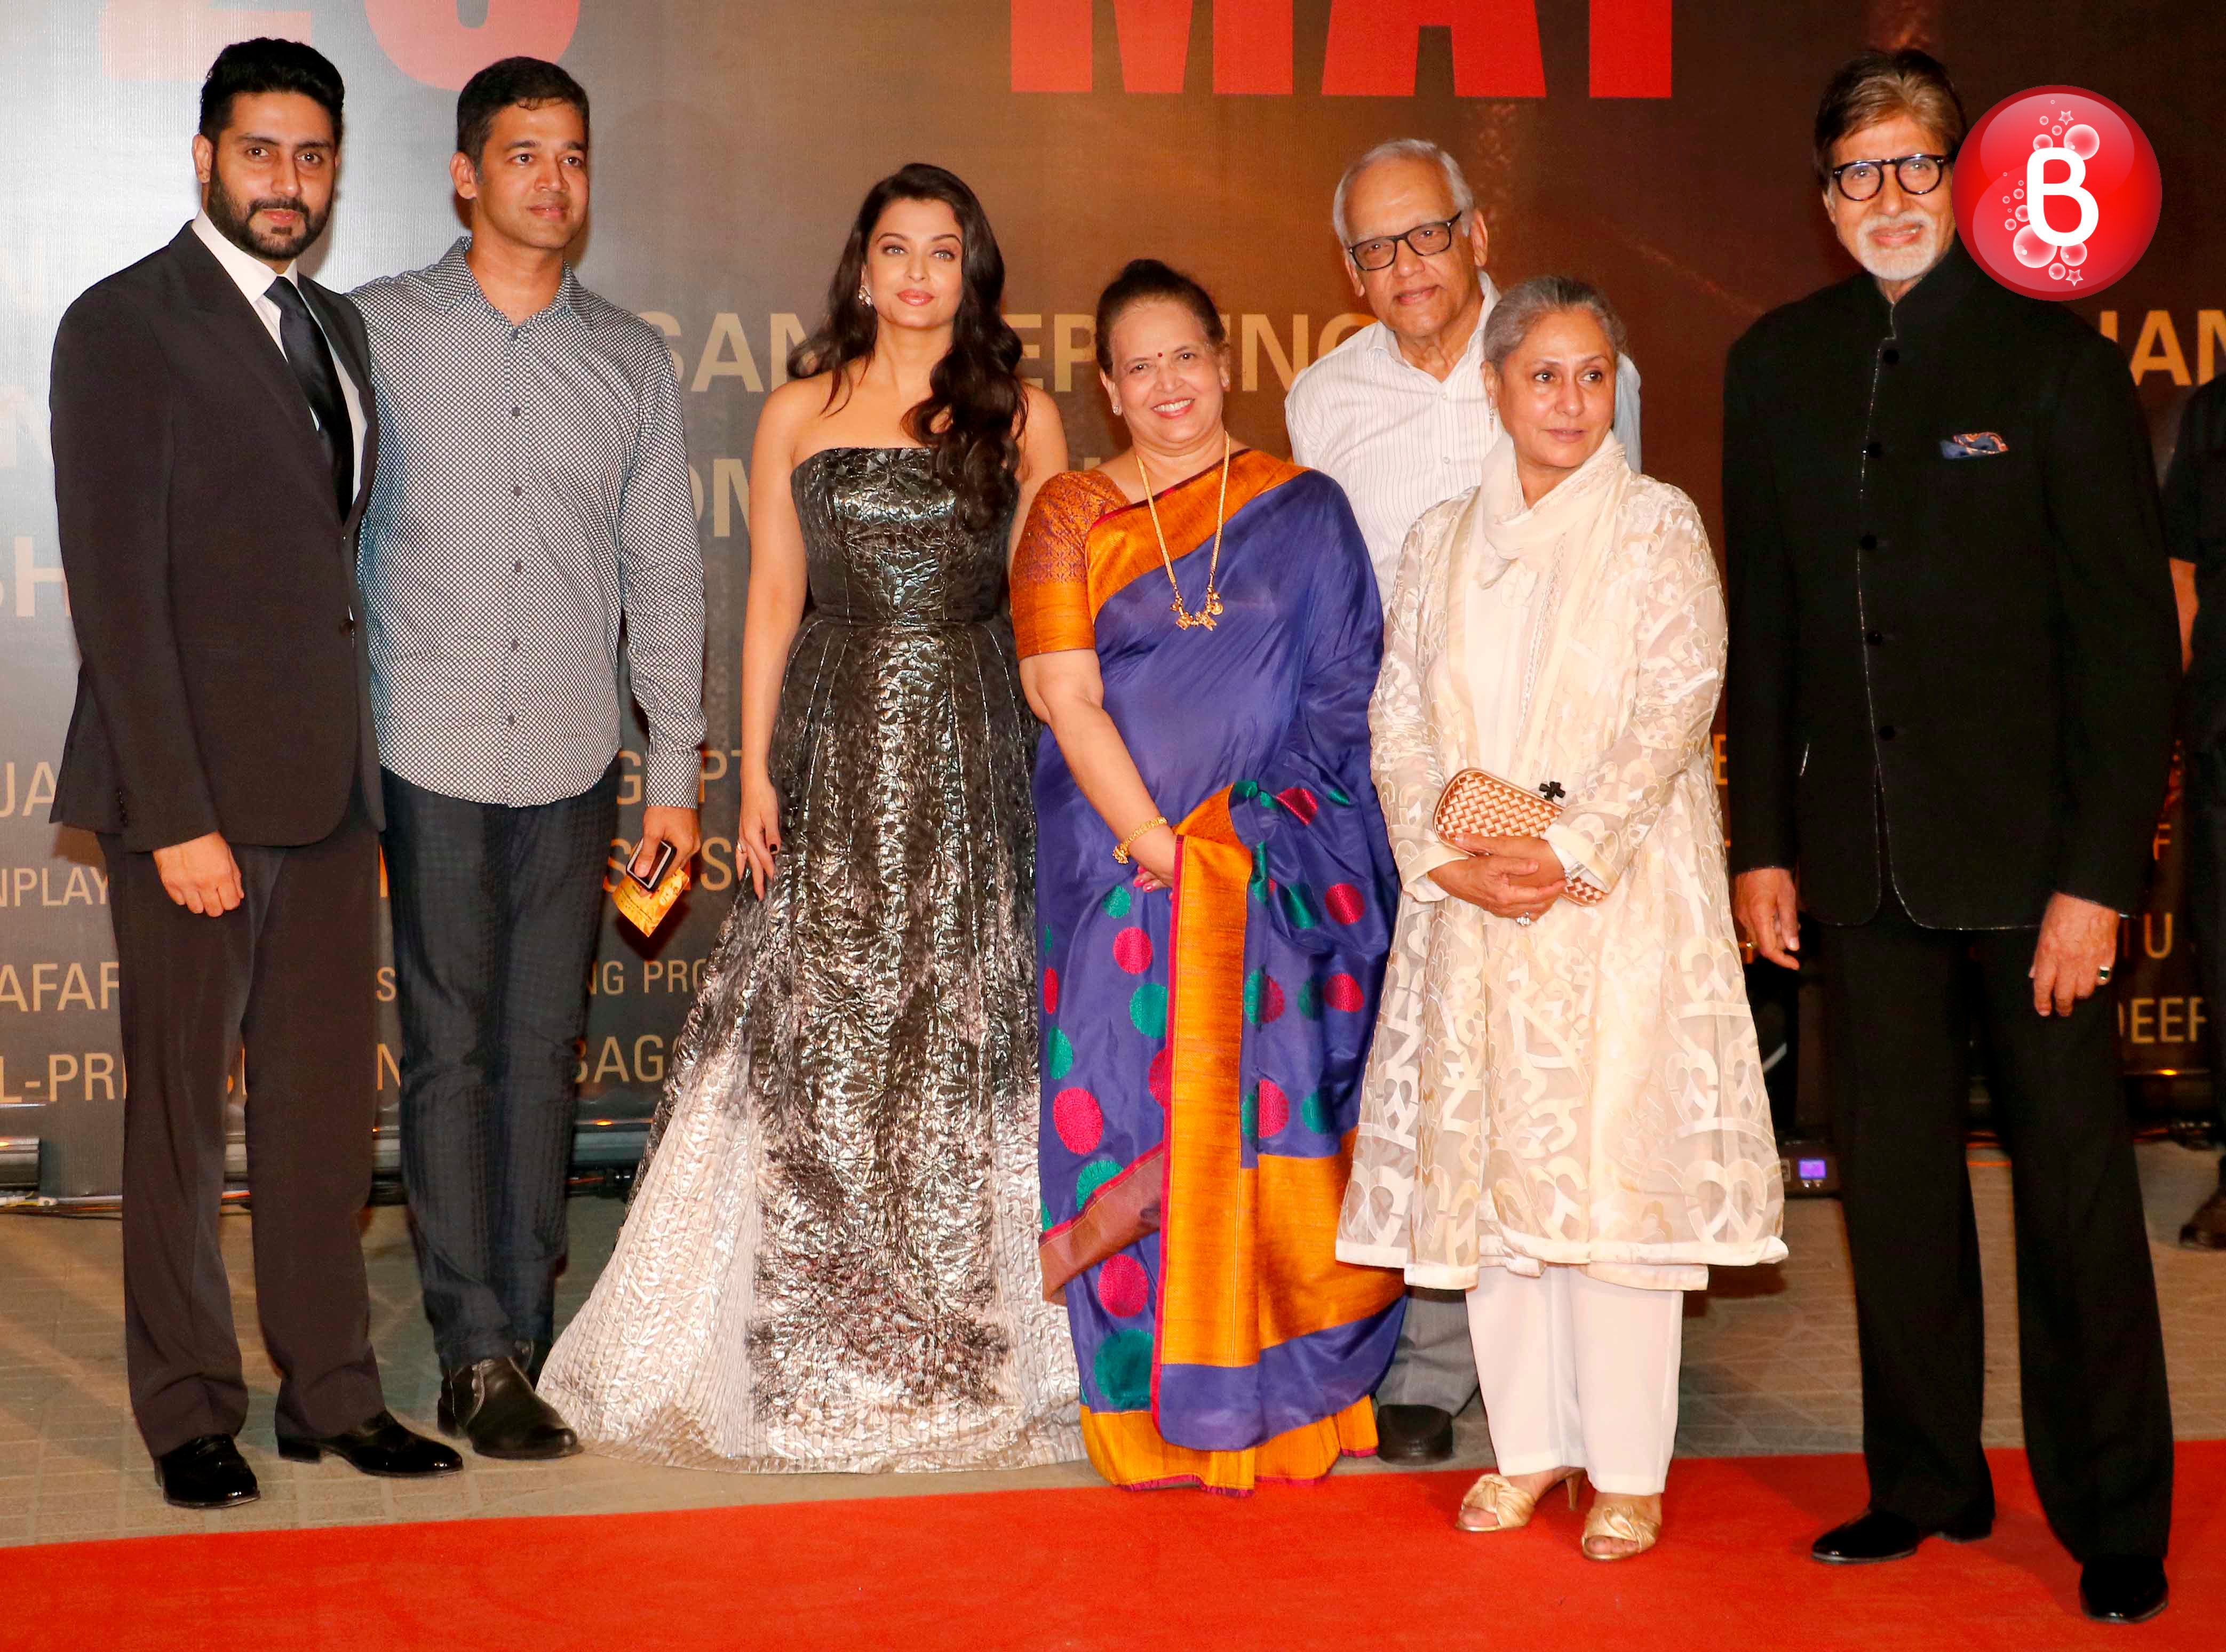 The Bachchans and friends